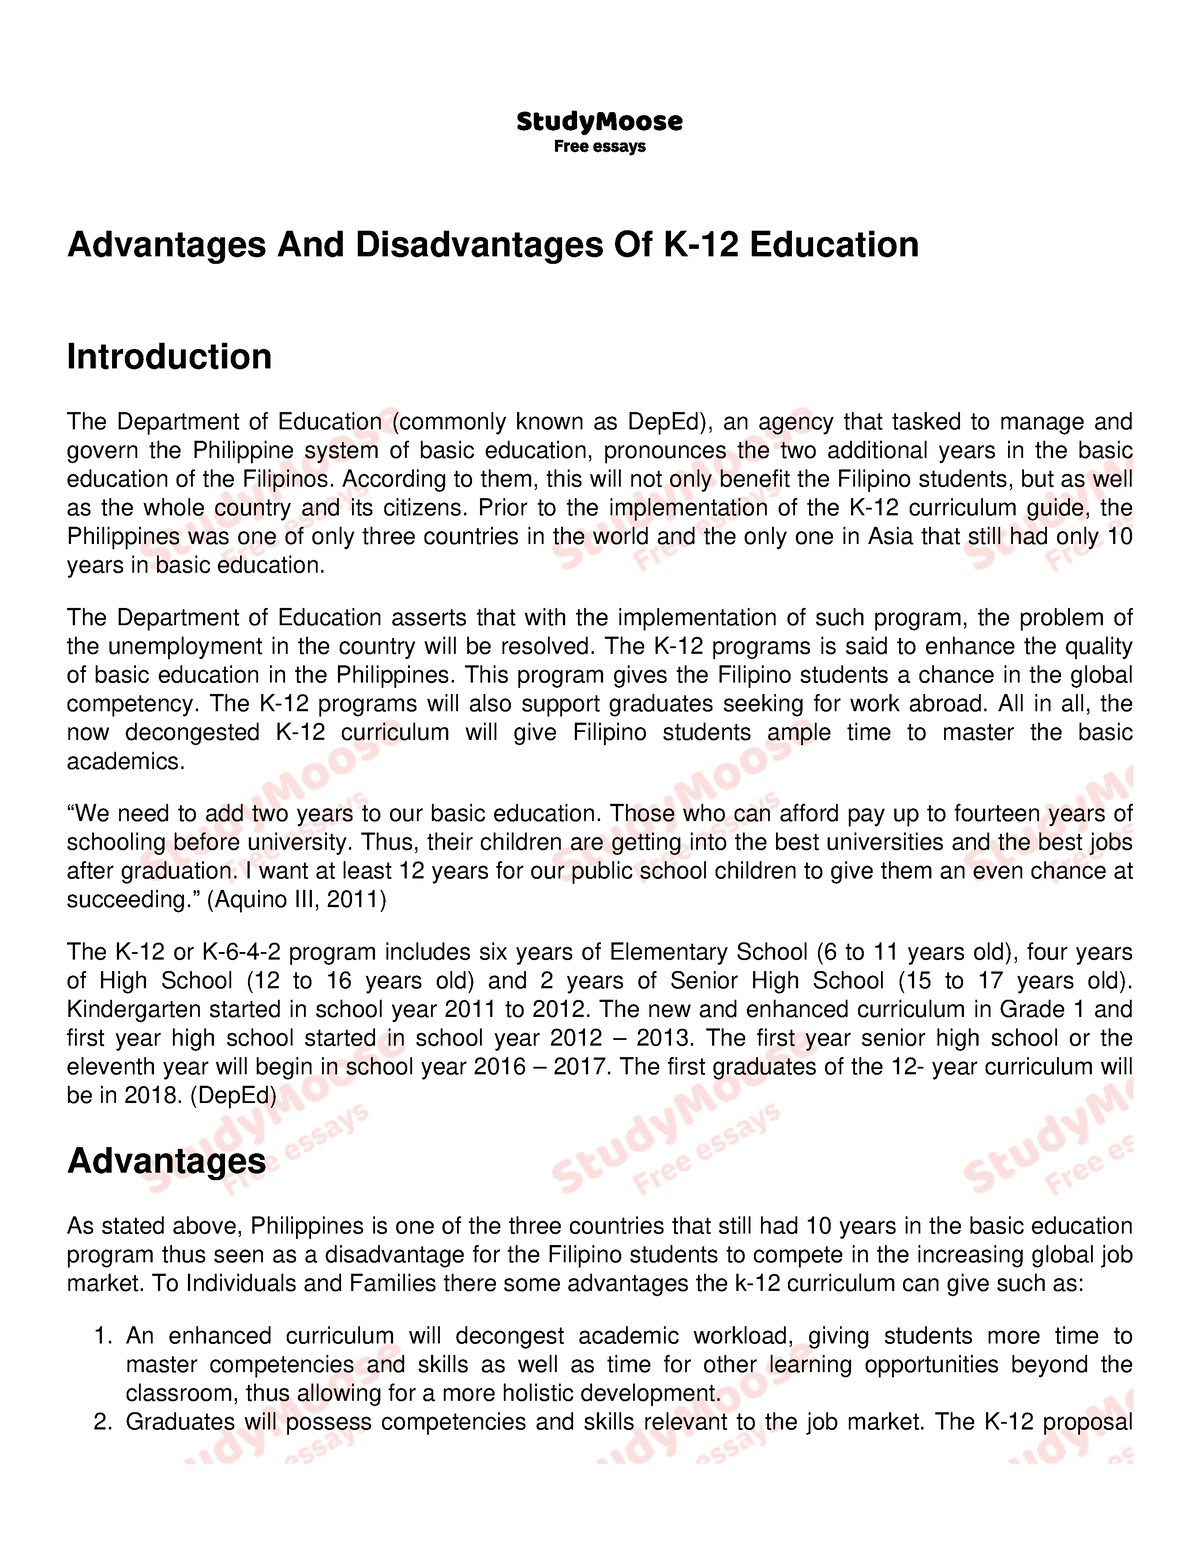 research paper about advantages and disadvantages of k 12